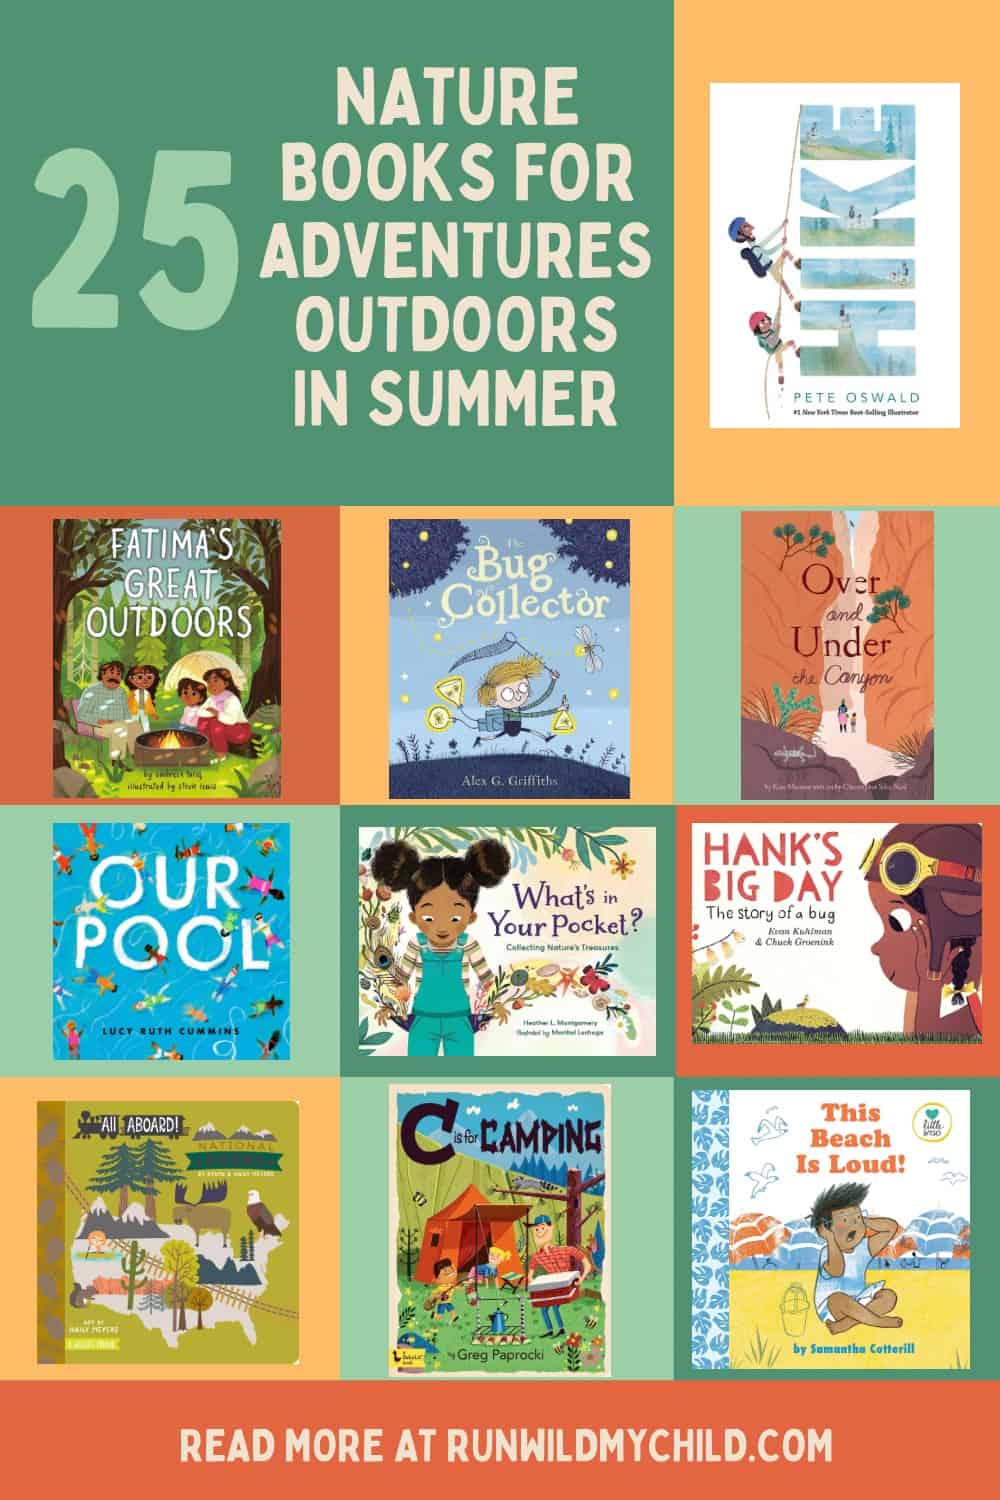 Grid of 10 nature books for adventures outdoors